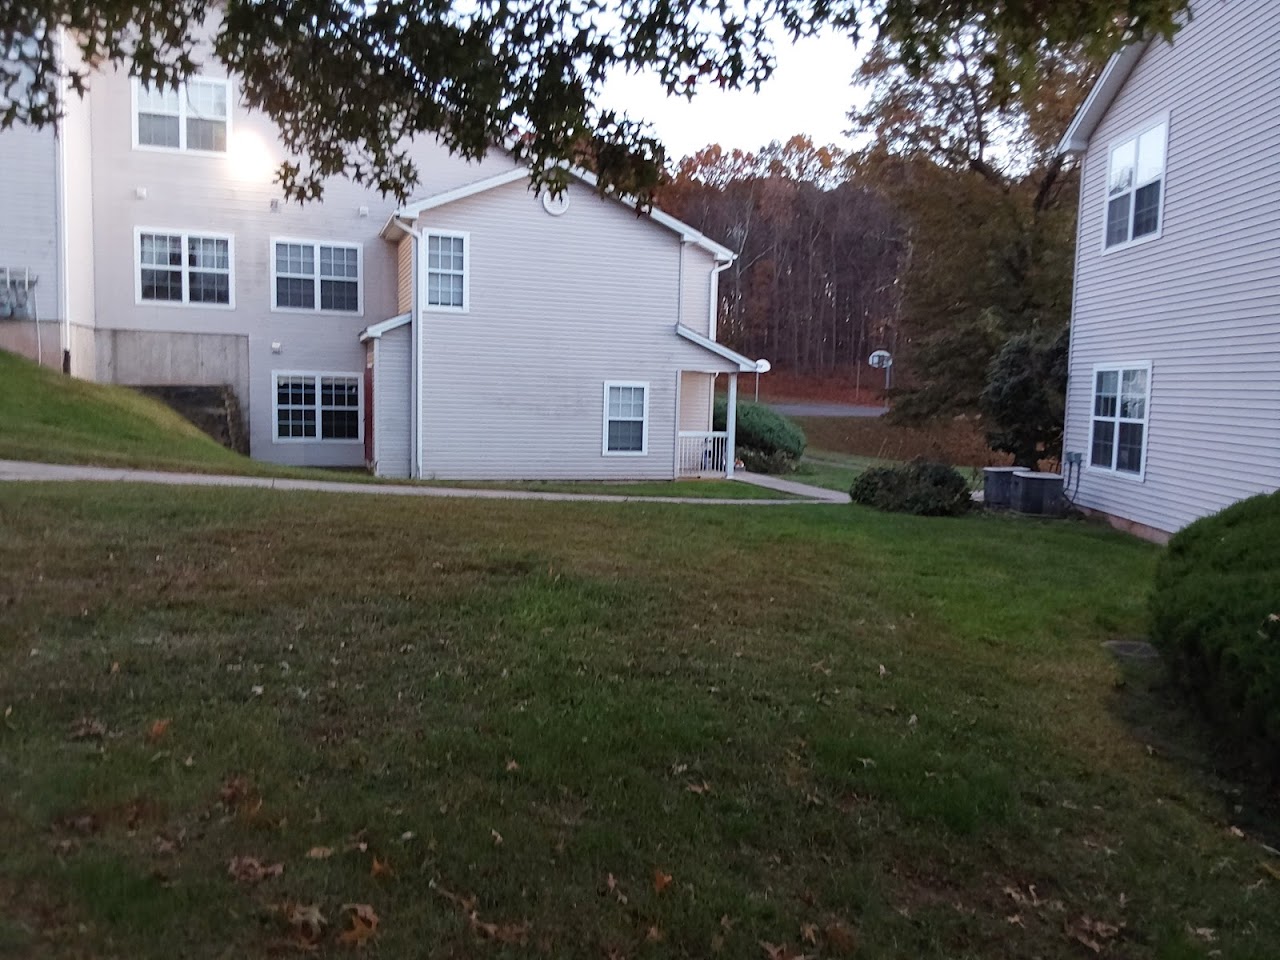 Photo of GRISWOLD HILLS OF NEWINGTON. Affordable housing located at 10 GRISWOLD HILLS DR NEWINGTON, CT 06111